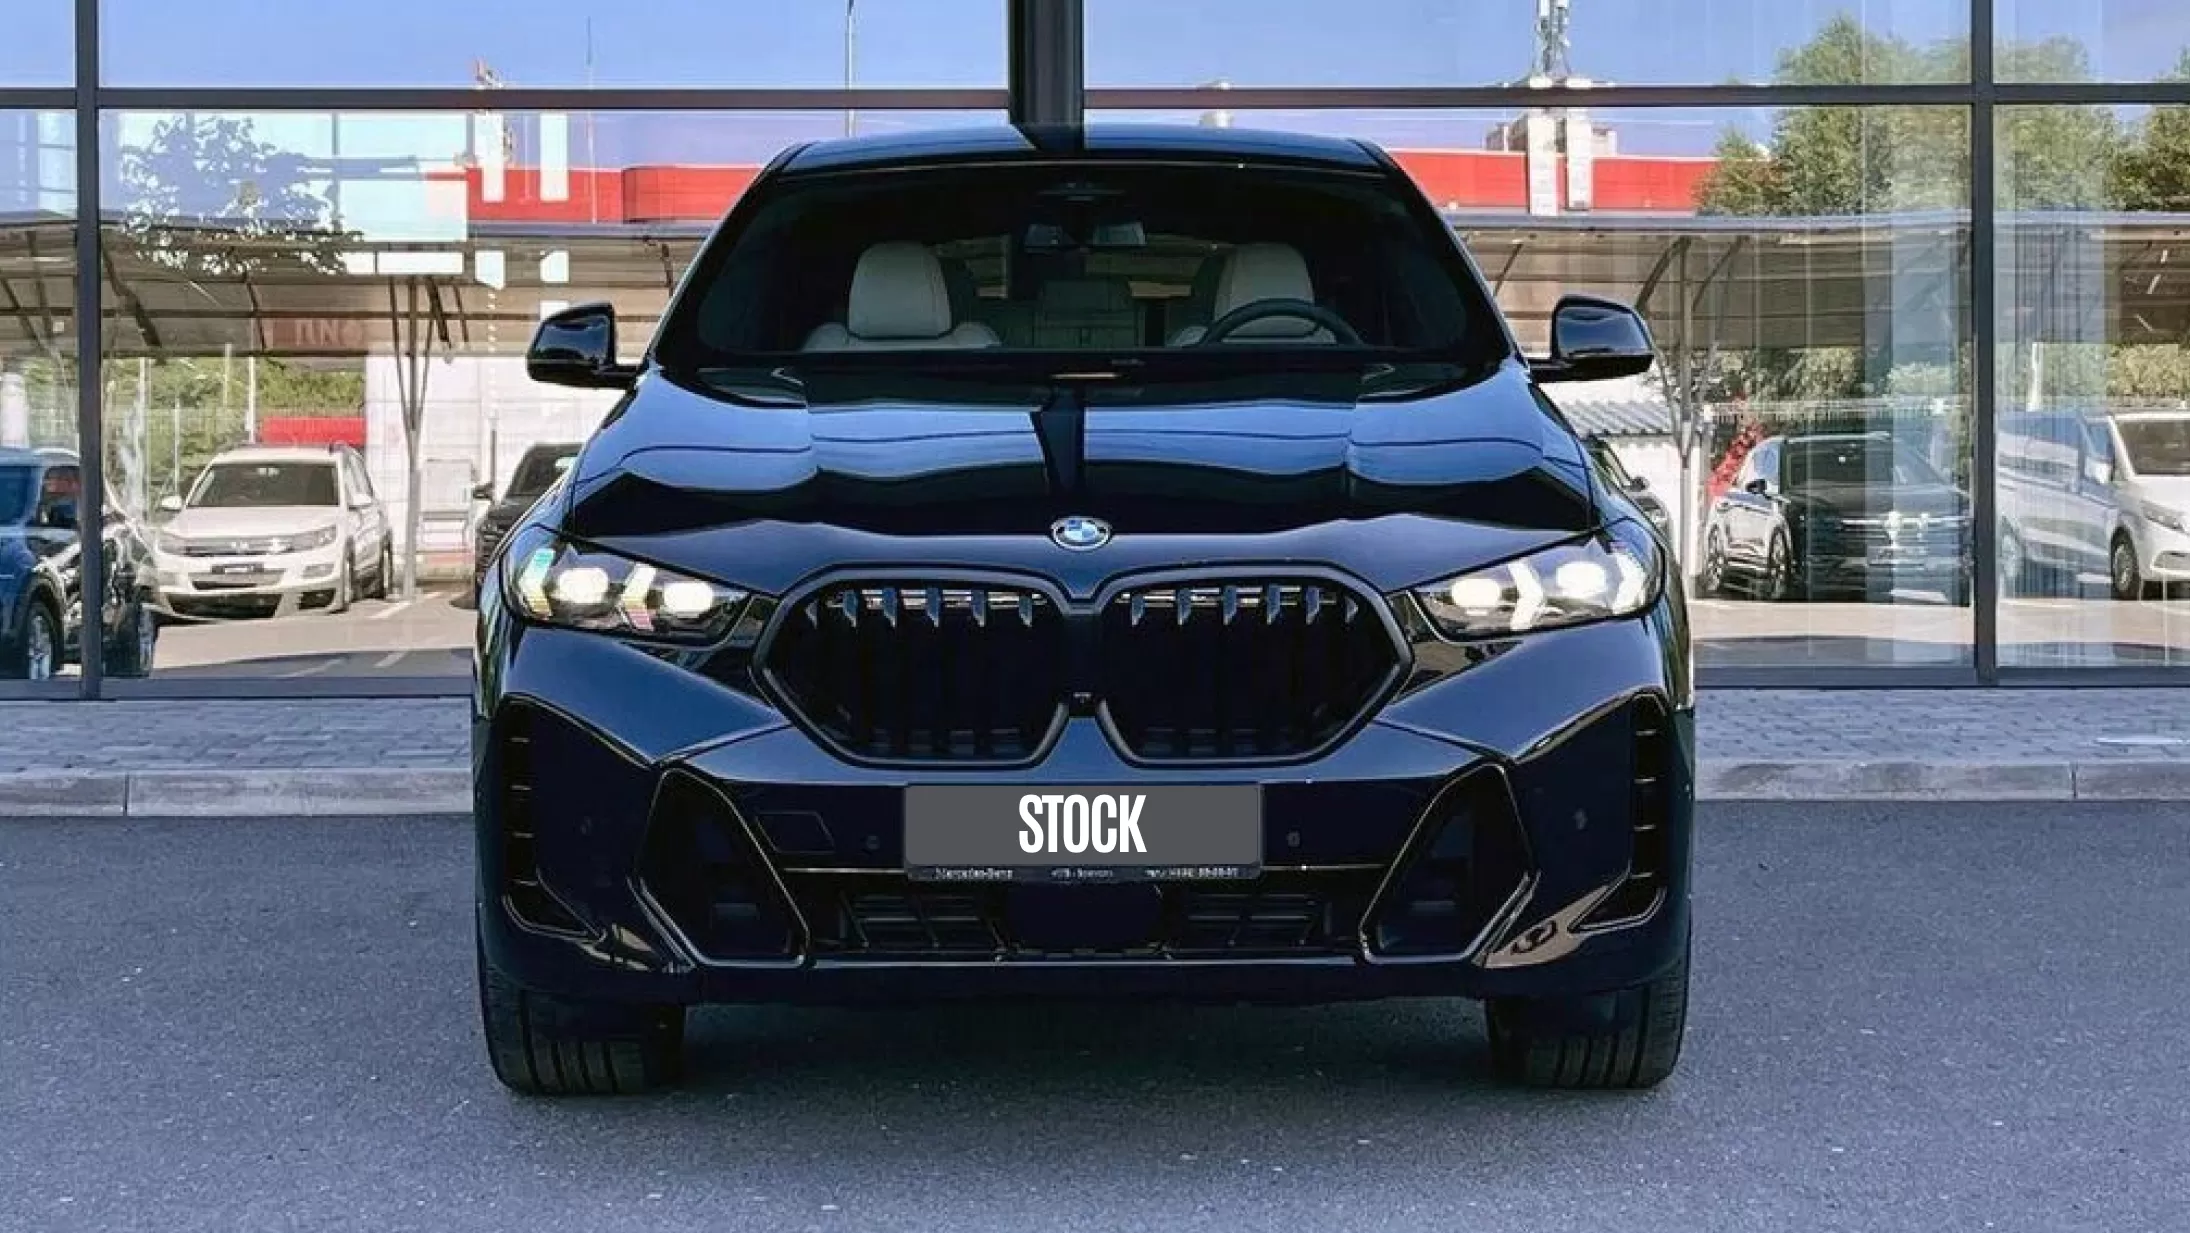 Front view on a BMW X6 LCI Facelift with a body kit giving the car a custom appearance